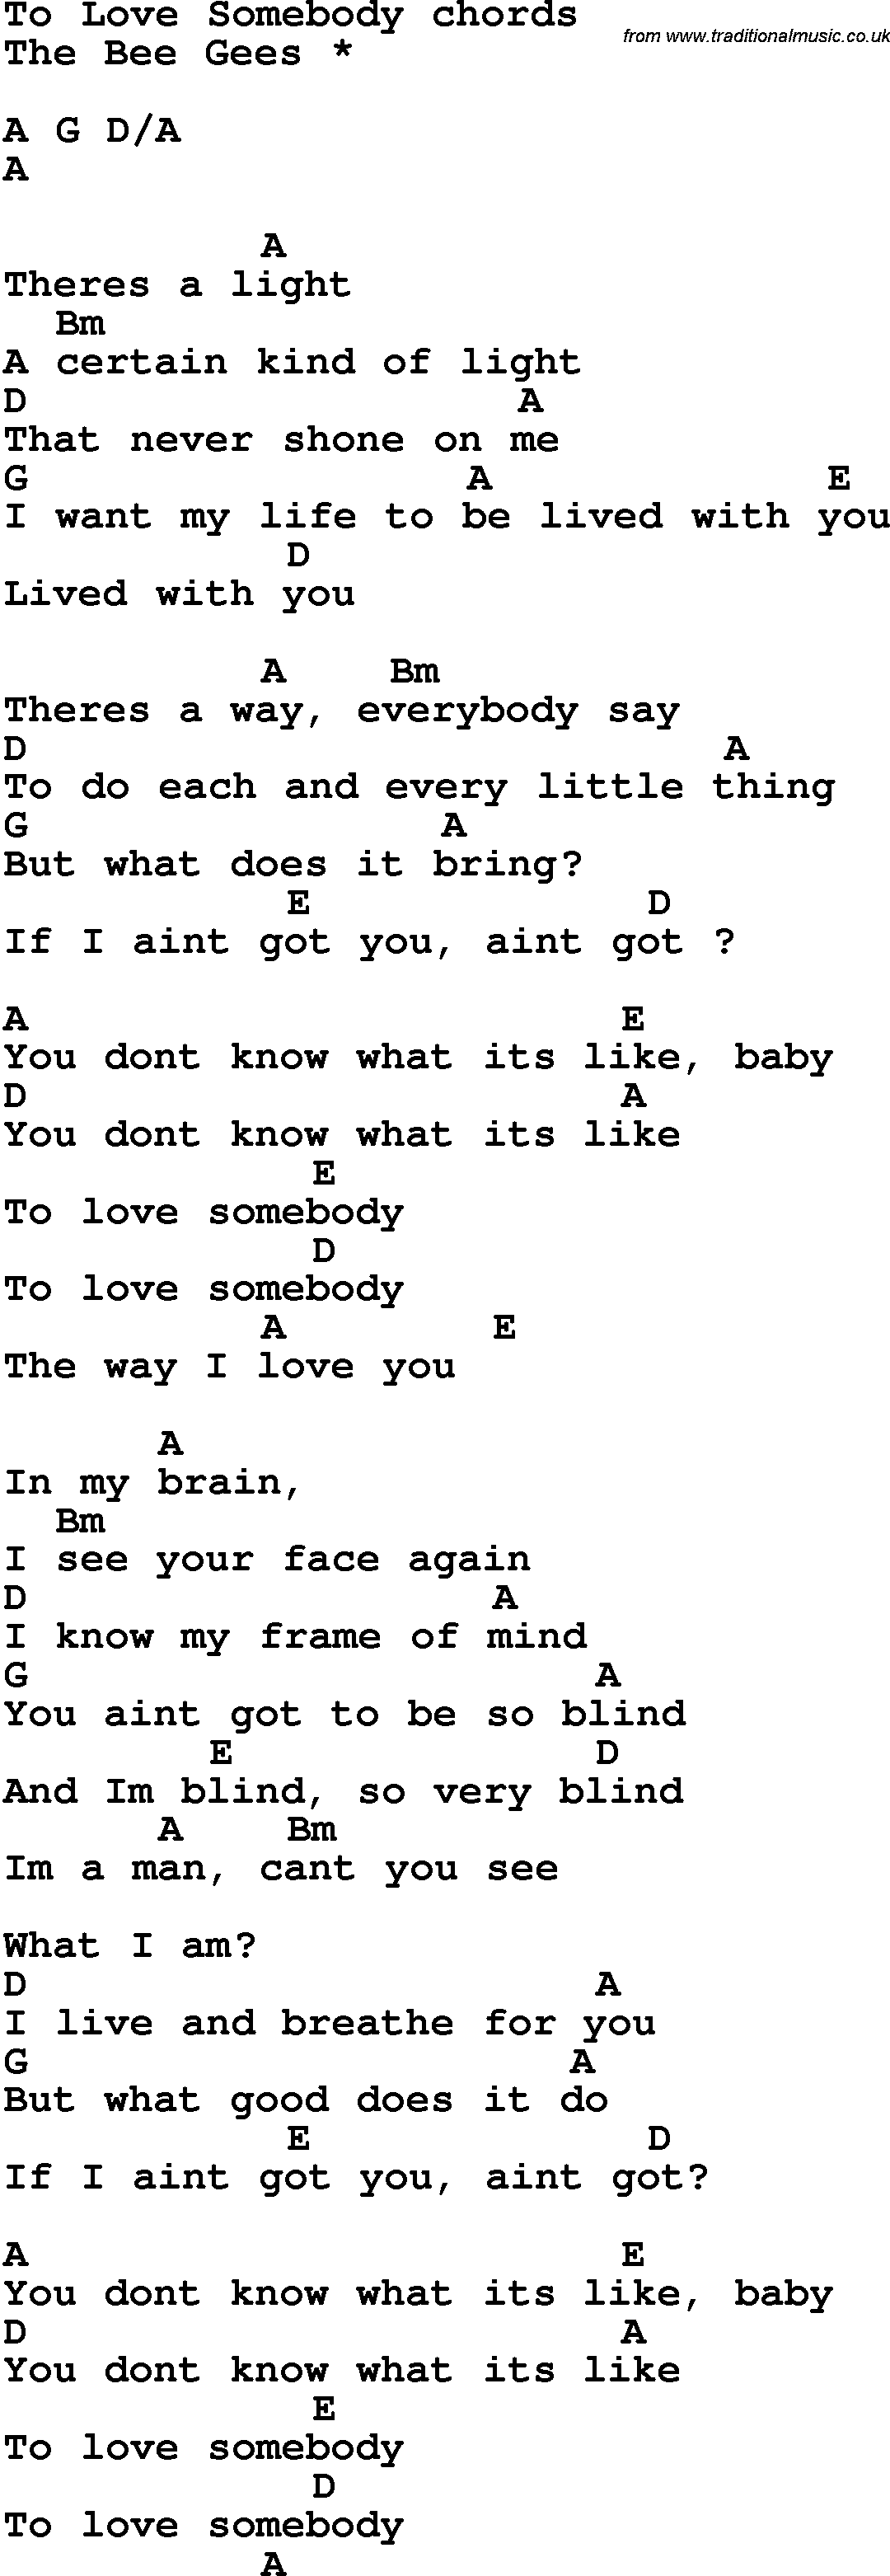 Song Lyrics with guitar chords for To Love Somebody